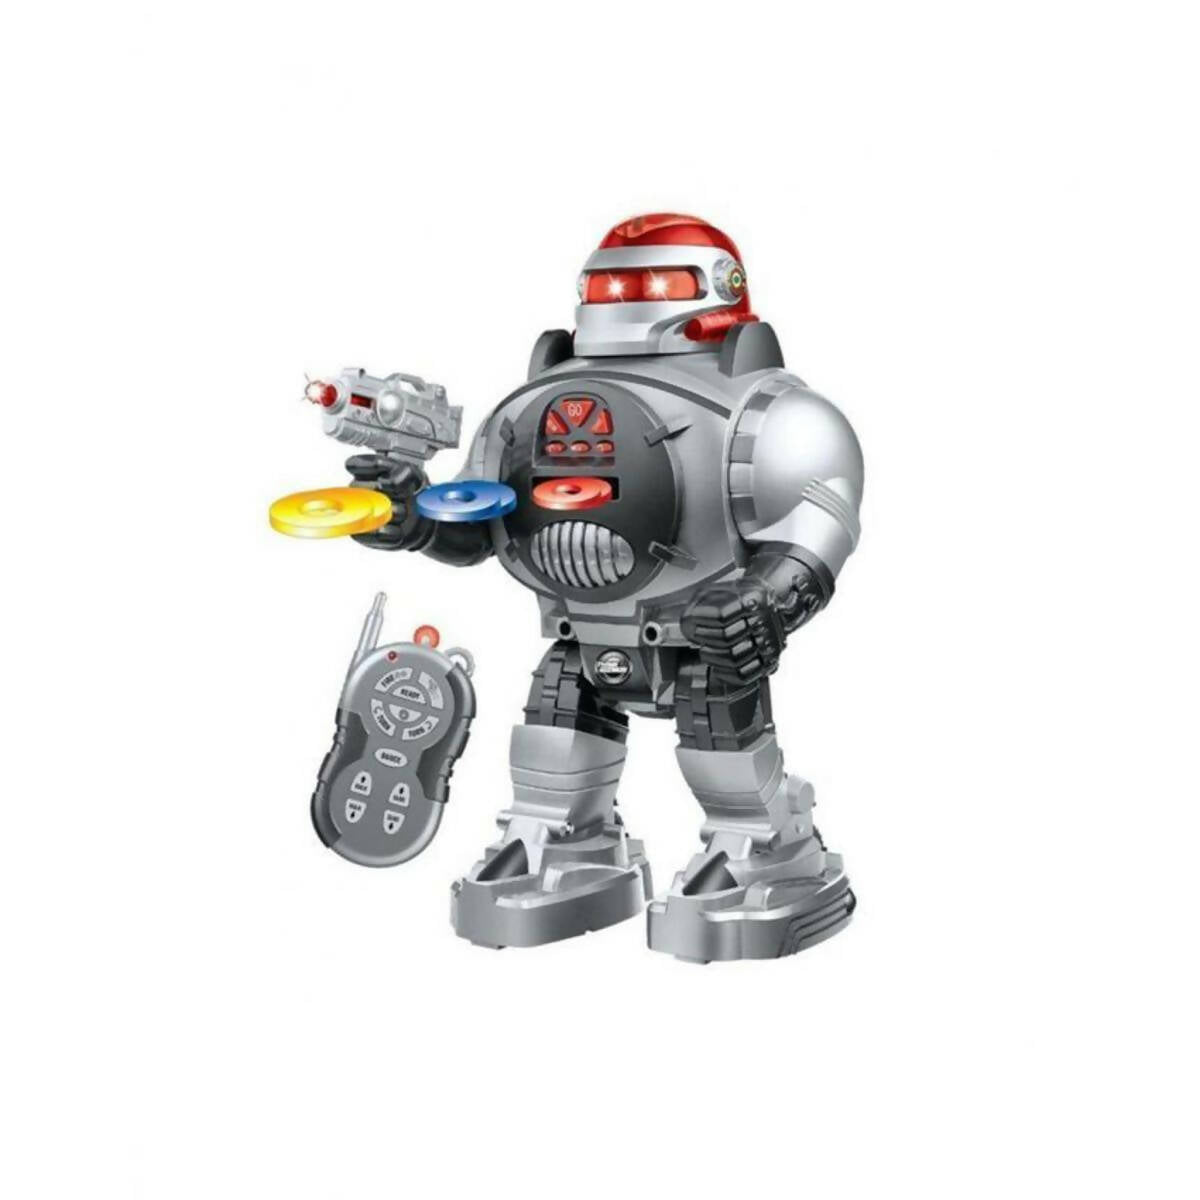 Space Fighter Robot - RC - Silver